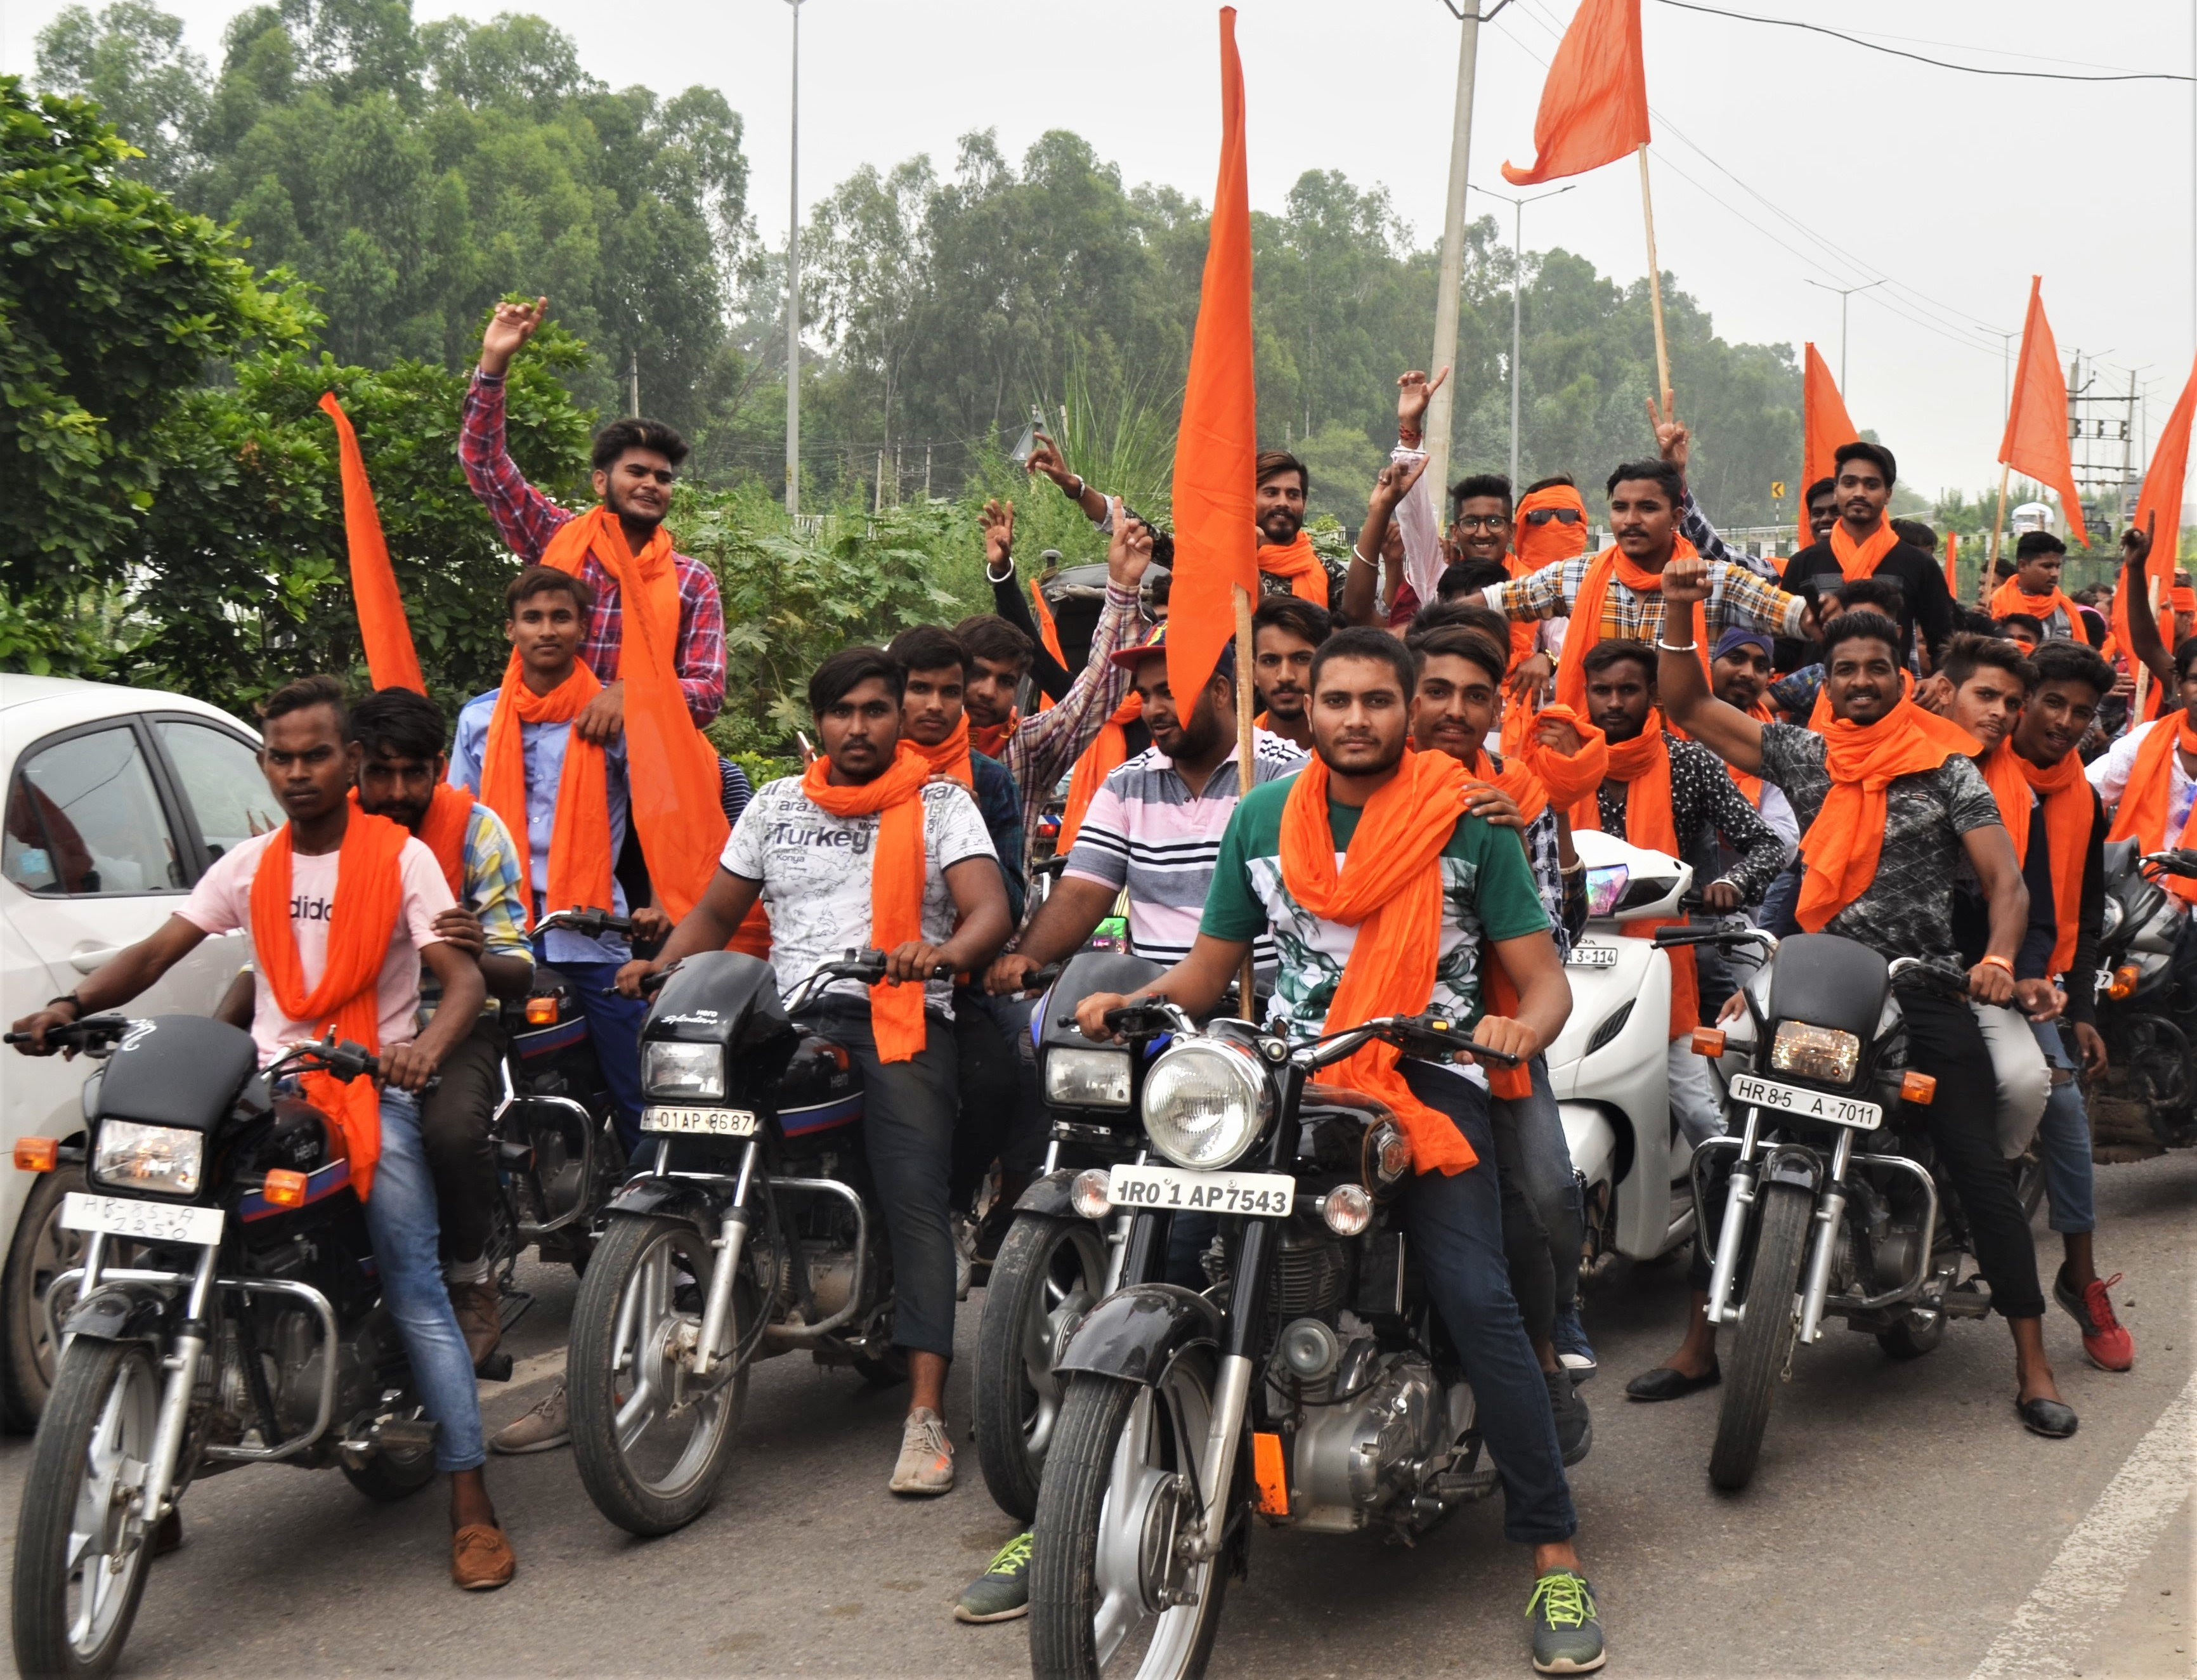  Hindu nationalists demonstrate against accused pastor in Ambala, Haryana state on Aug. 3, 2018. (Morning Star News)